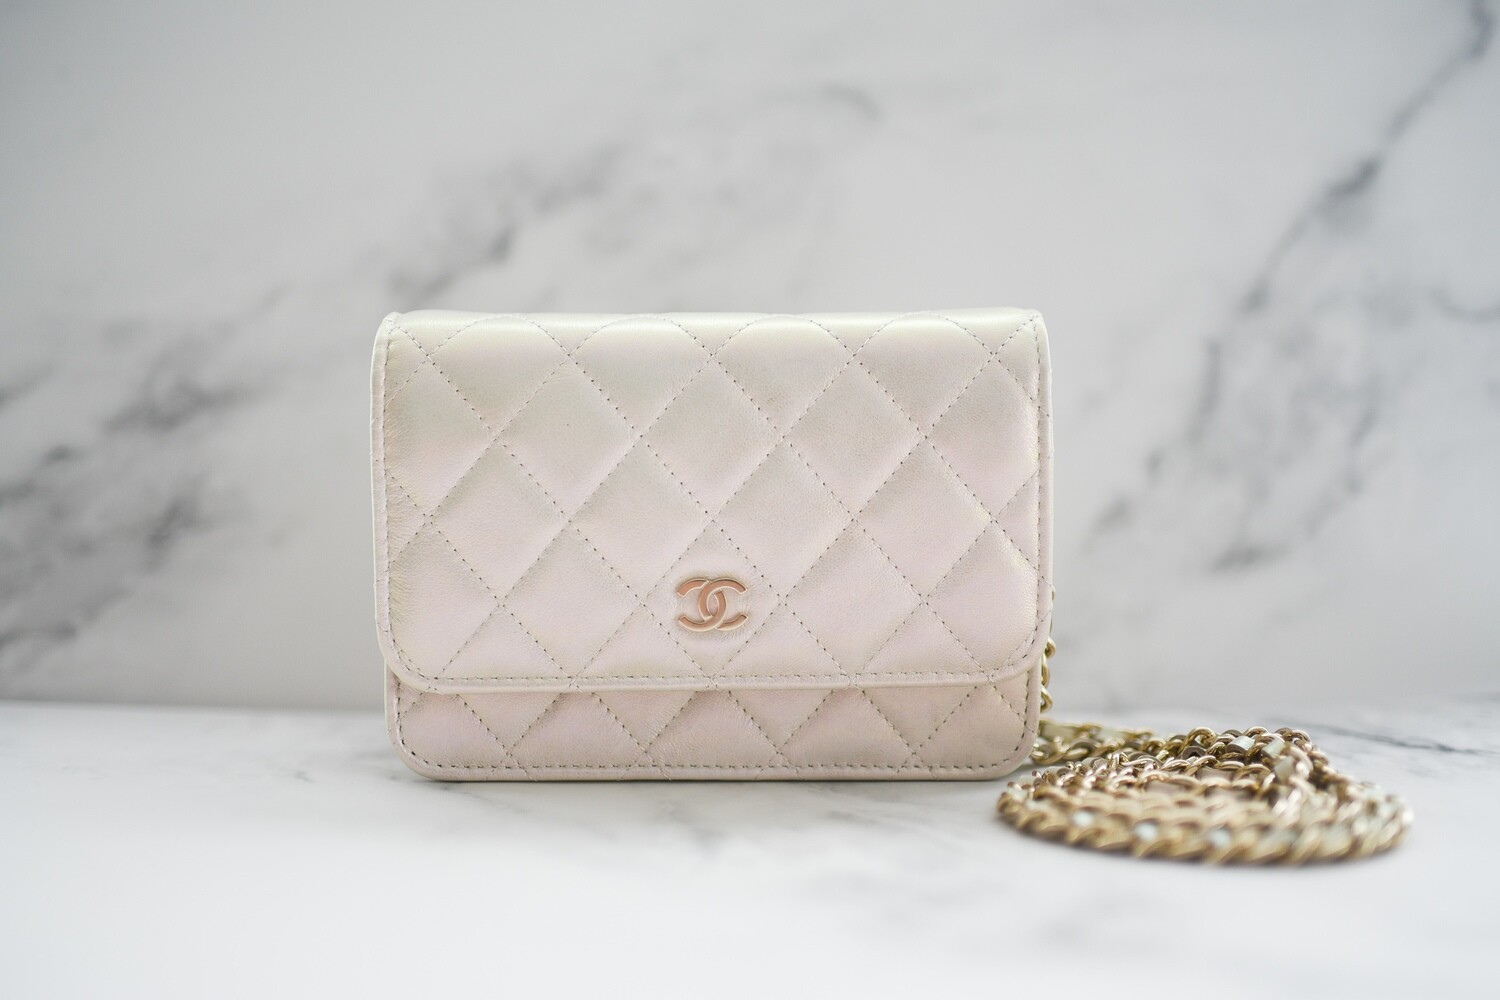 white chanel wallet on